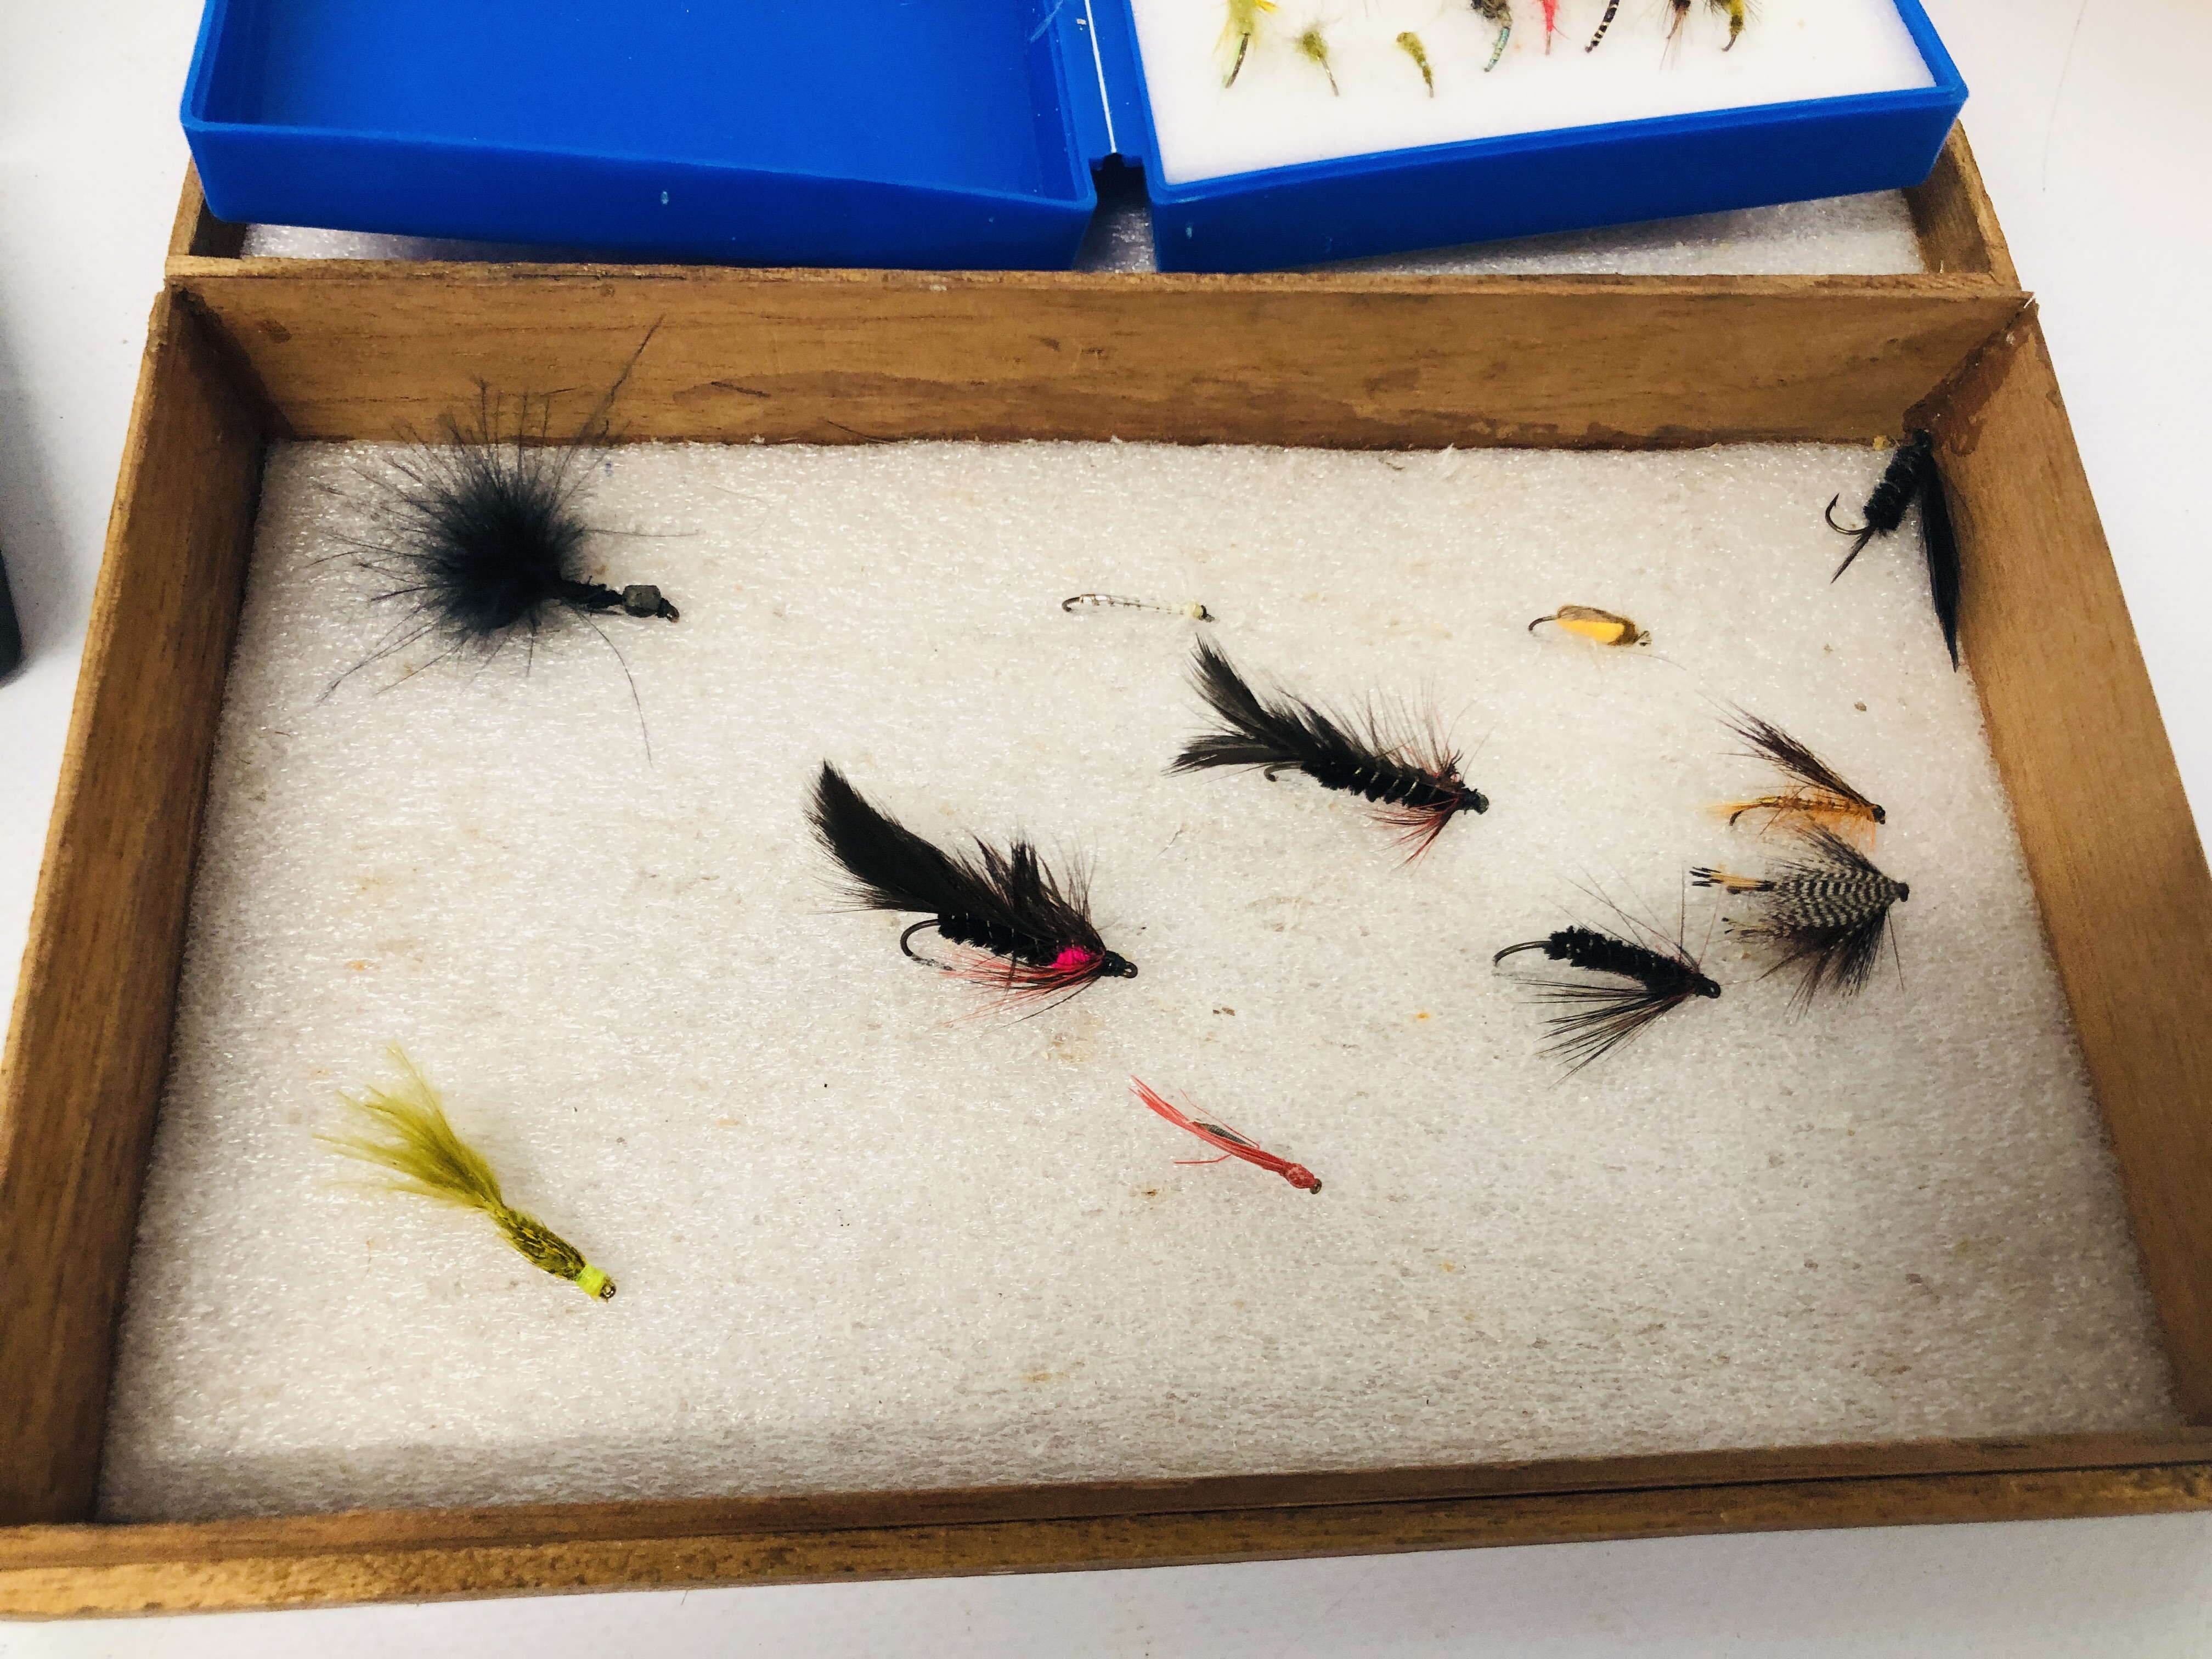 SIX CASES CONTAINING AN ASSORTMENT OF FISHING FLIES. - Image 2 of 9